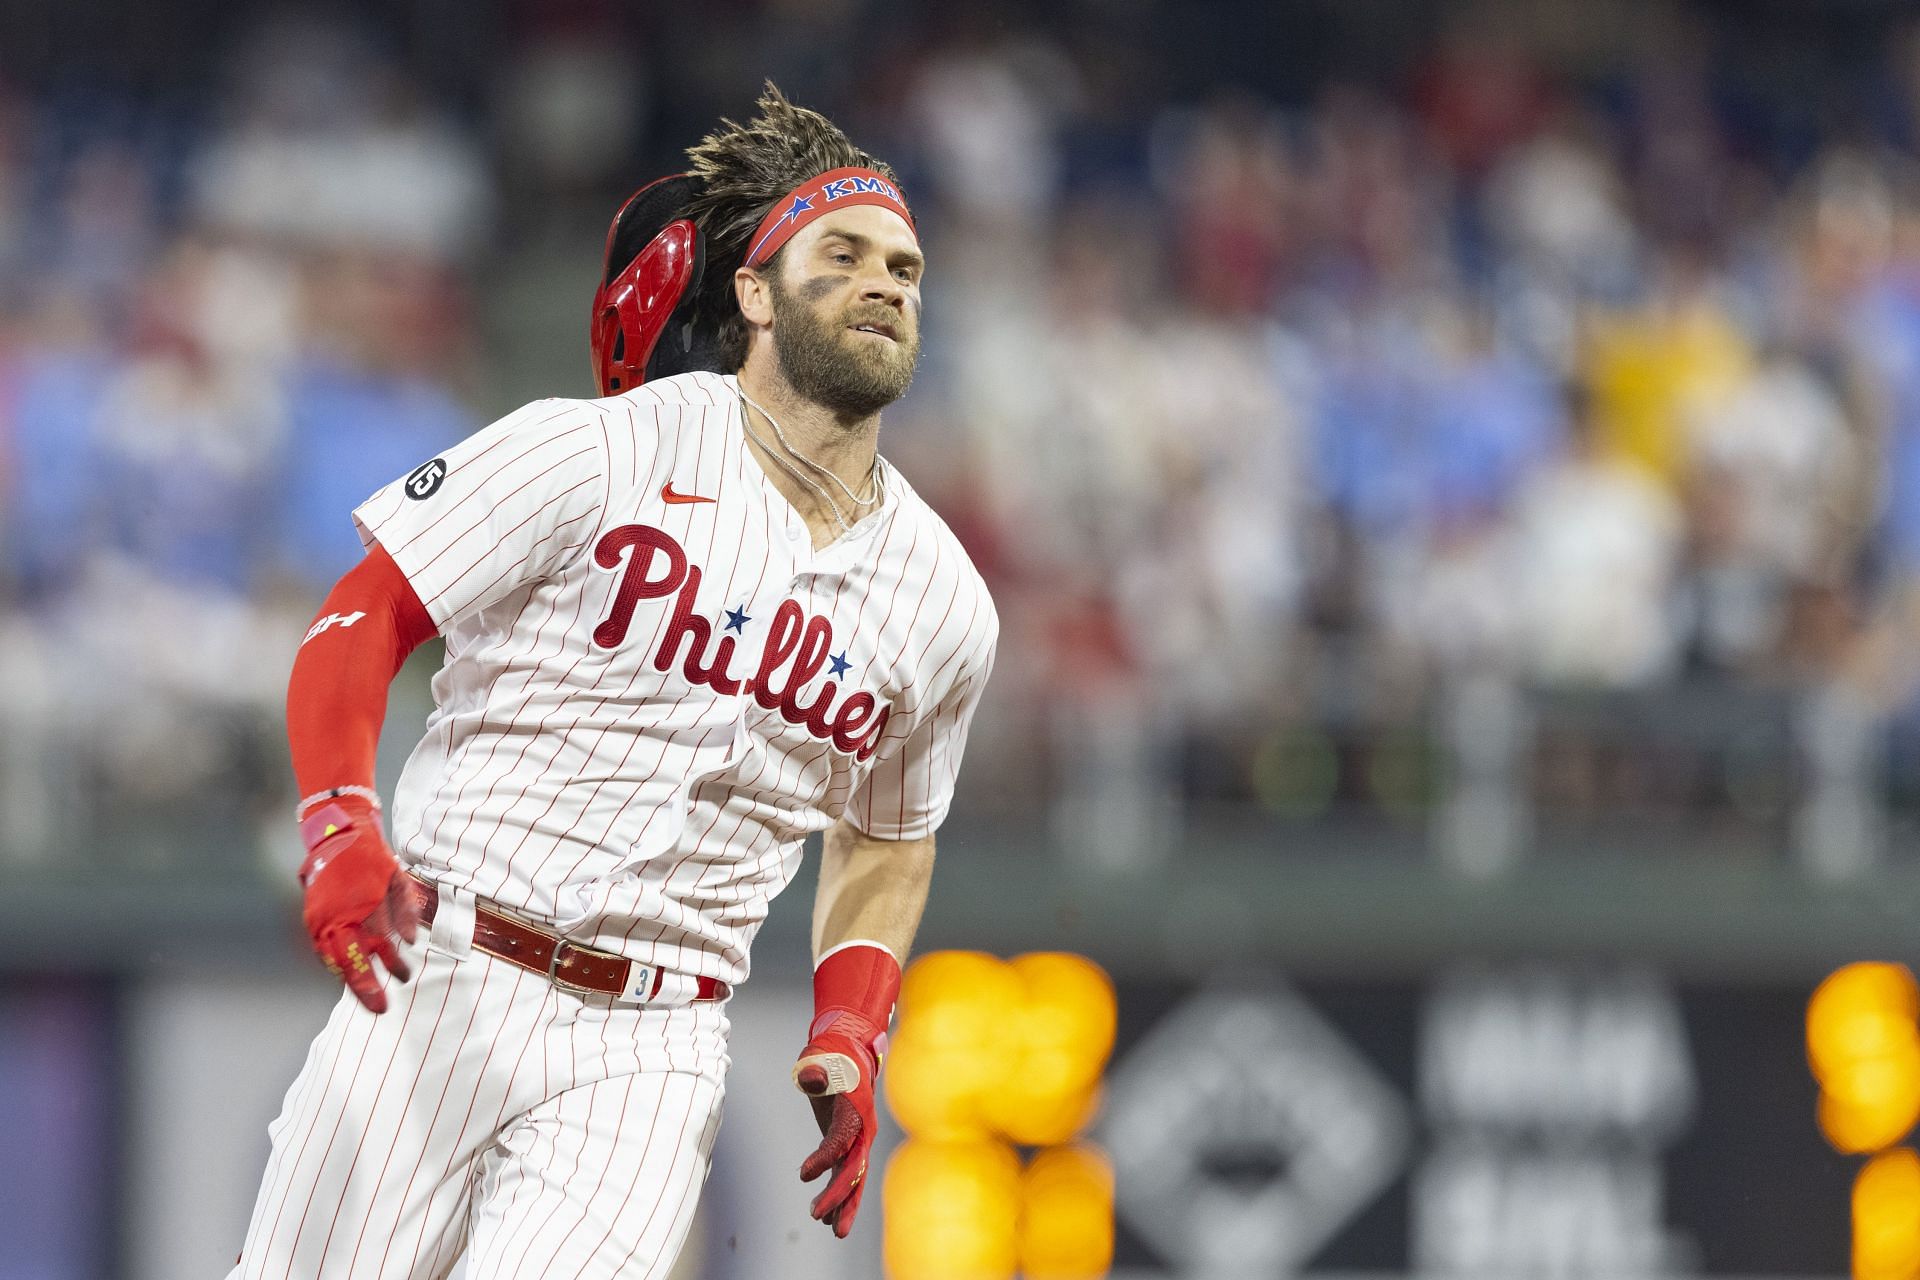 Phillies fans used to hate Bryce Harper. Now in the World Series, he's  becoming a folk hero. - Washington Times